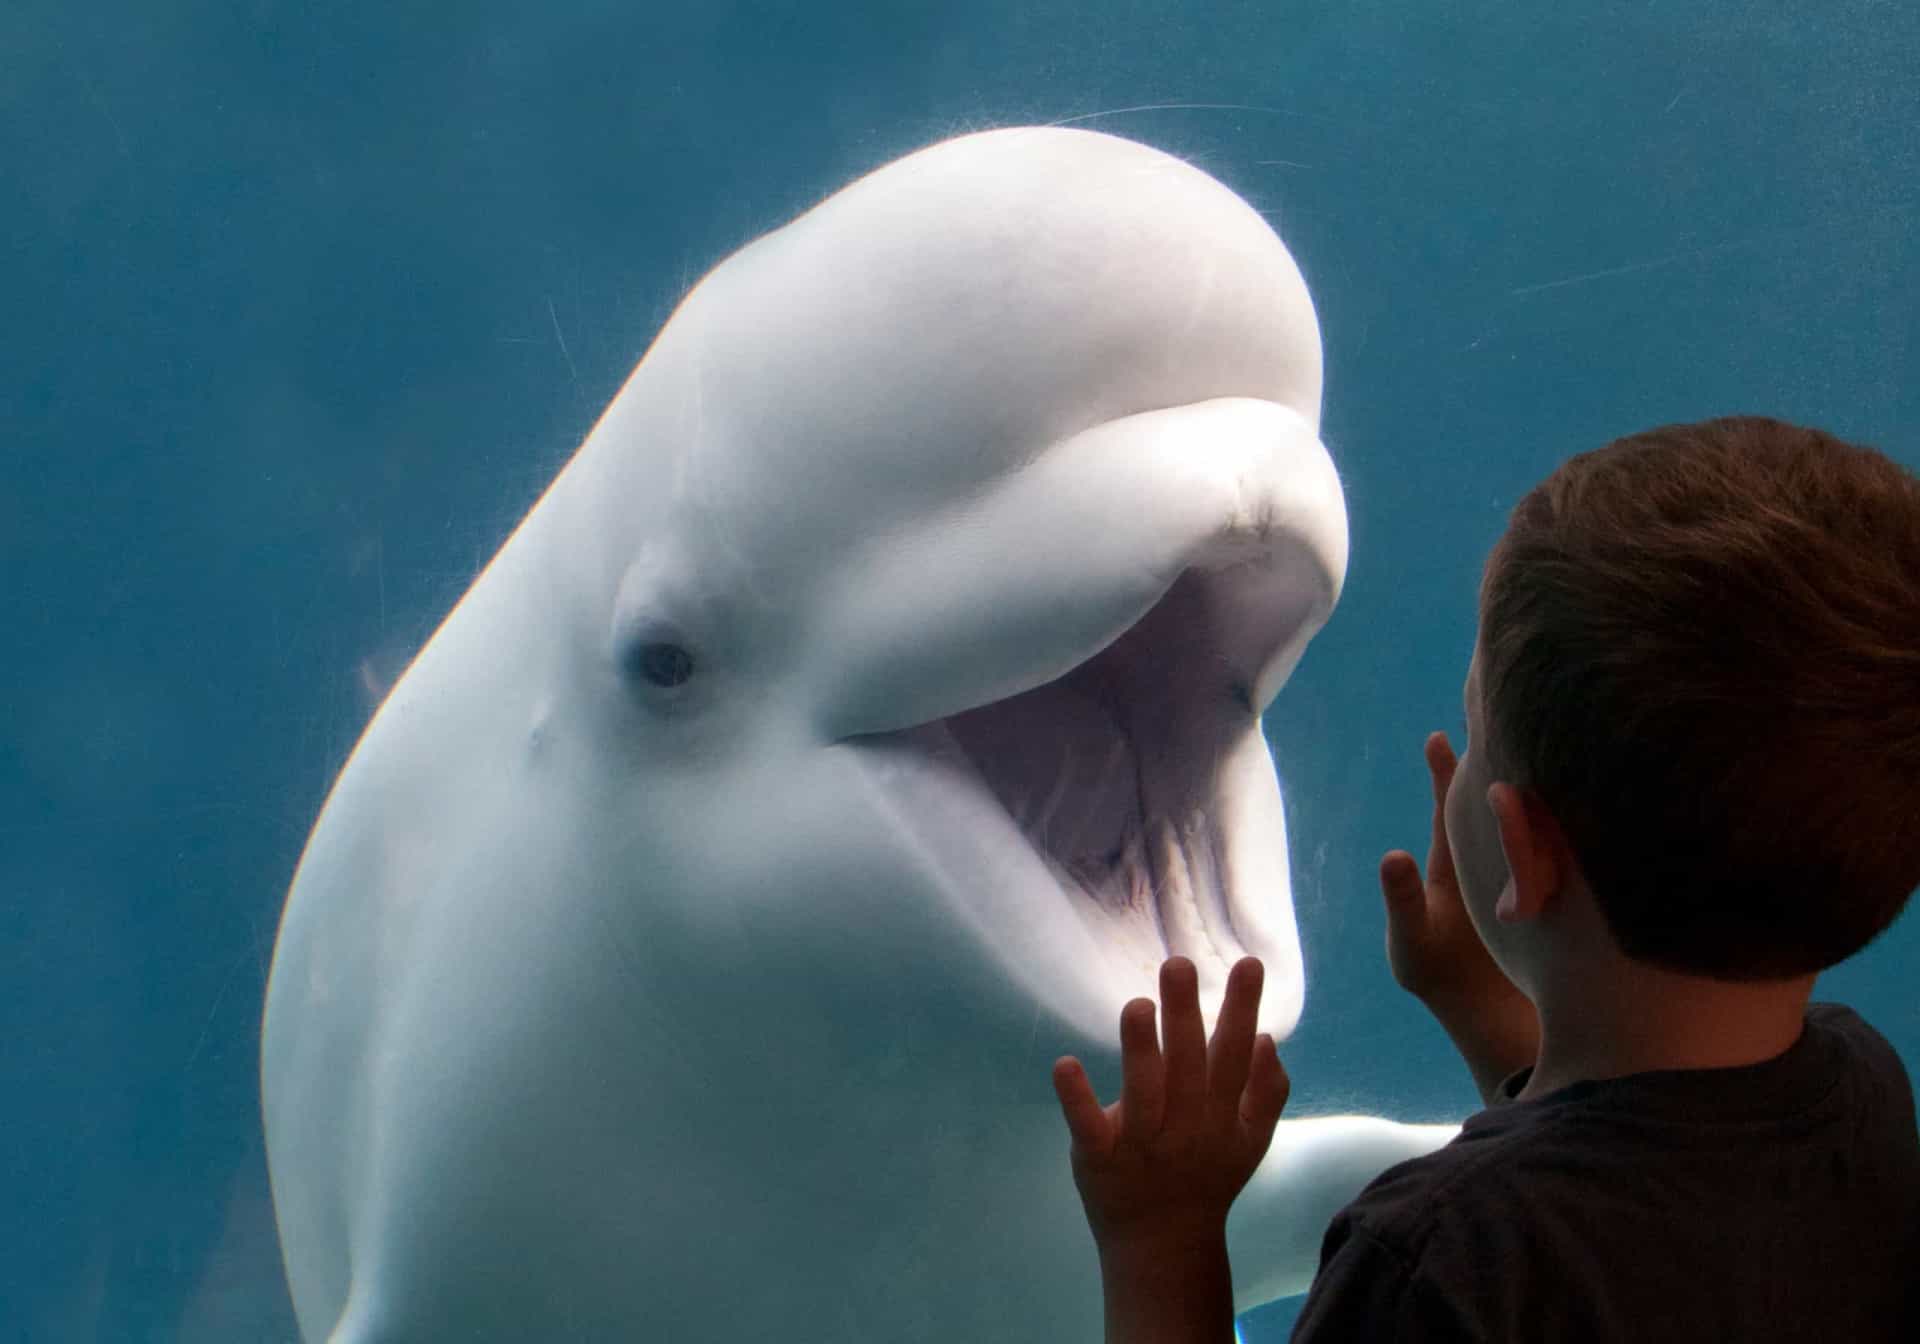 <p>Mystic Aquarium is home to playful beluga <a href="https://www.starsinsider.com/lifestyle/457467/how-whales-help-to-combat-climate-change" rel="noopener">whales</a>, the only ones found in New England. After meeting and greeting these beguiling creatures, say hi to the other residents, among them seals, sharks, and sea lions.</p><p><a href="https://www.msn.com/en-us/community/channel/vid-7xx8mnucu55yw63we9va2gwr7uihbxwc68fxqp25x6tg4ftibpra?cvid=94631541bc0f4f89bfd59158d696ad7e">Follow us and access great exclusive content everyday</a></p>